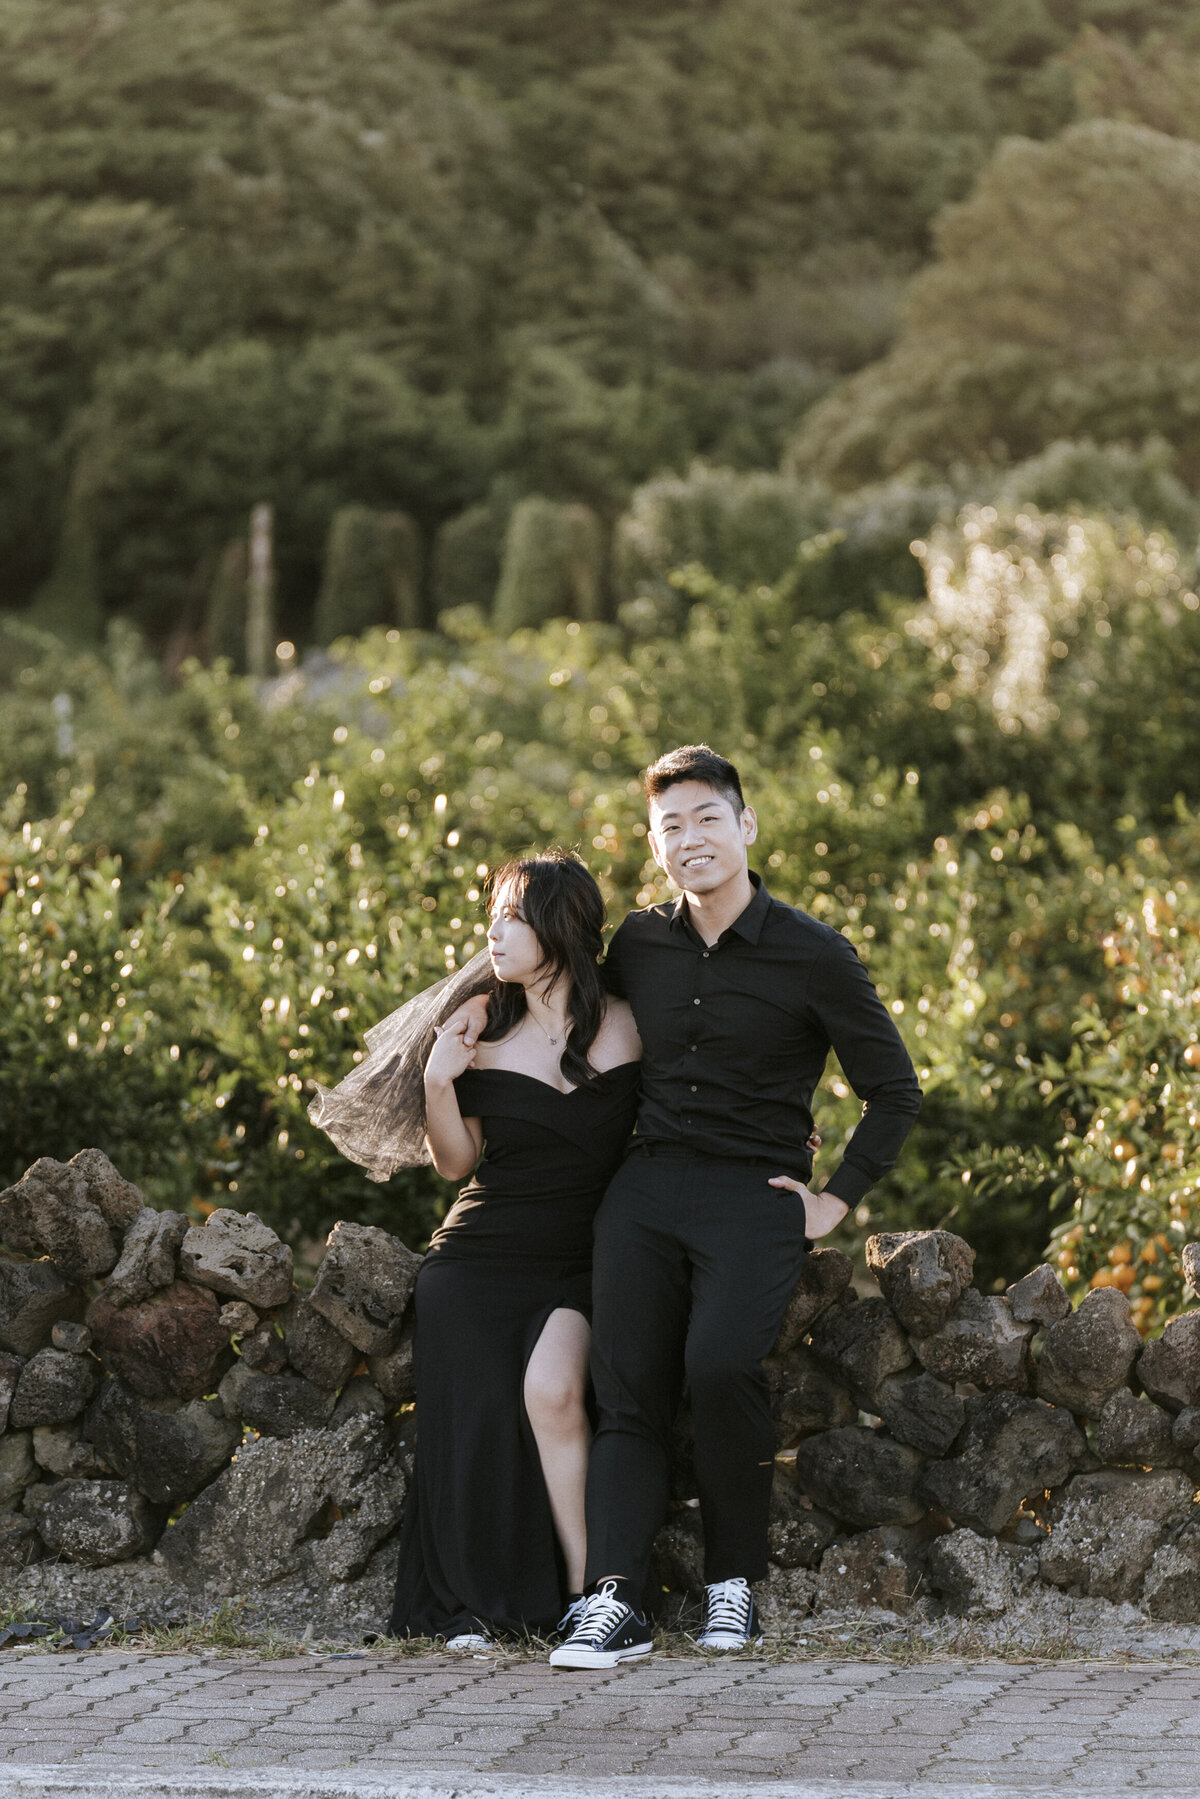 the bride wears black dress with slit and a little black veil then the groom wears an all black outfit while sitting on the pile of rocks